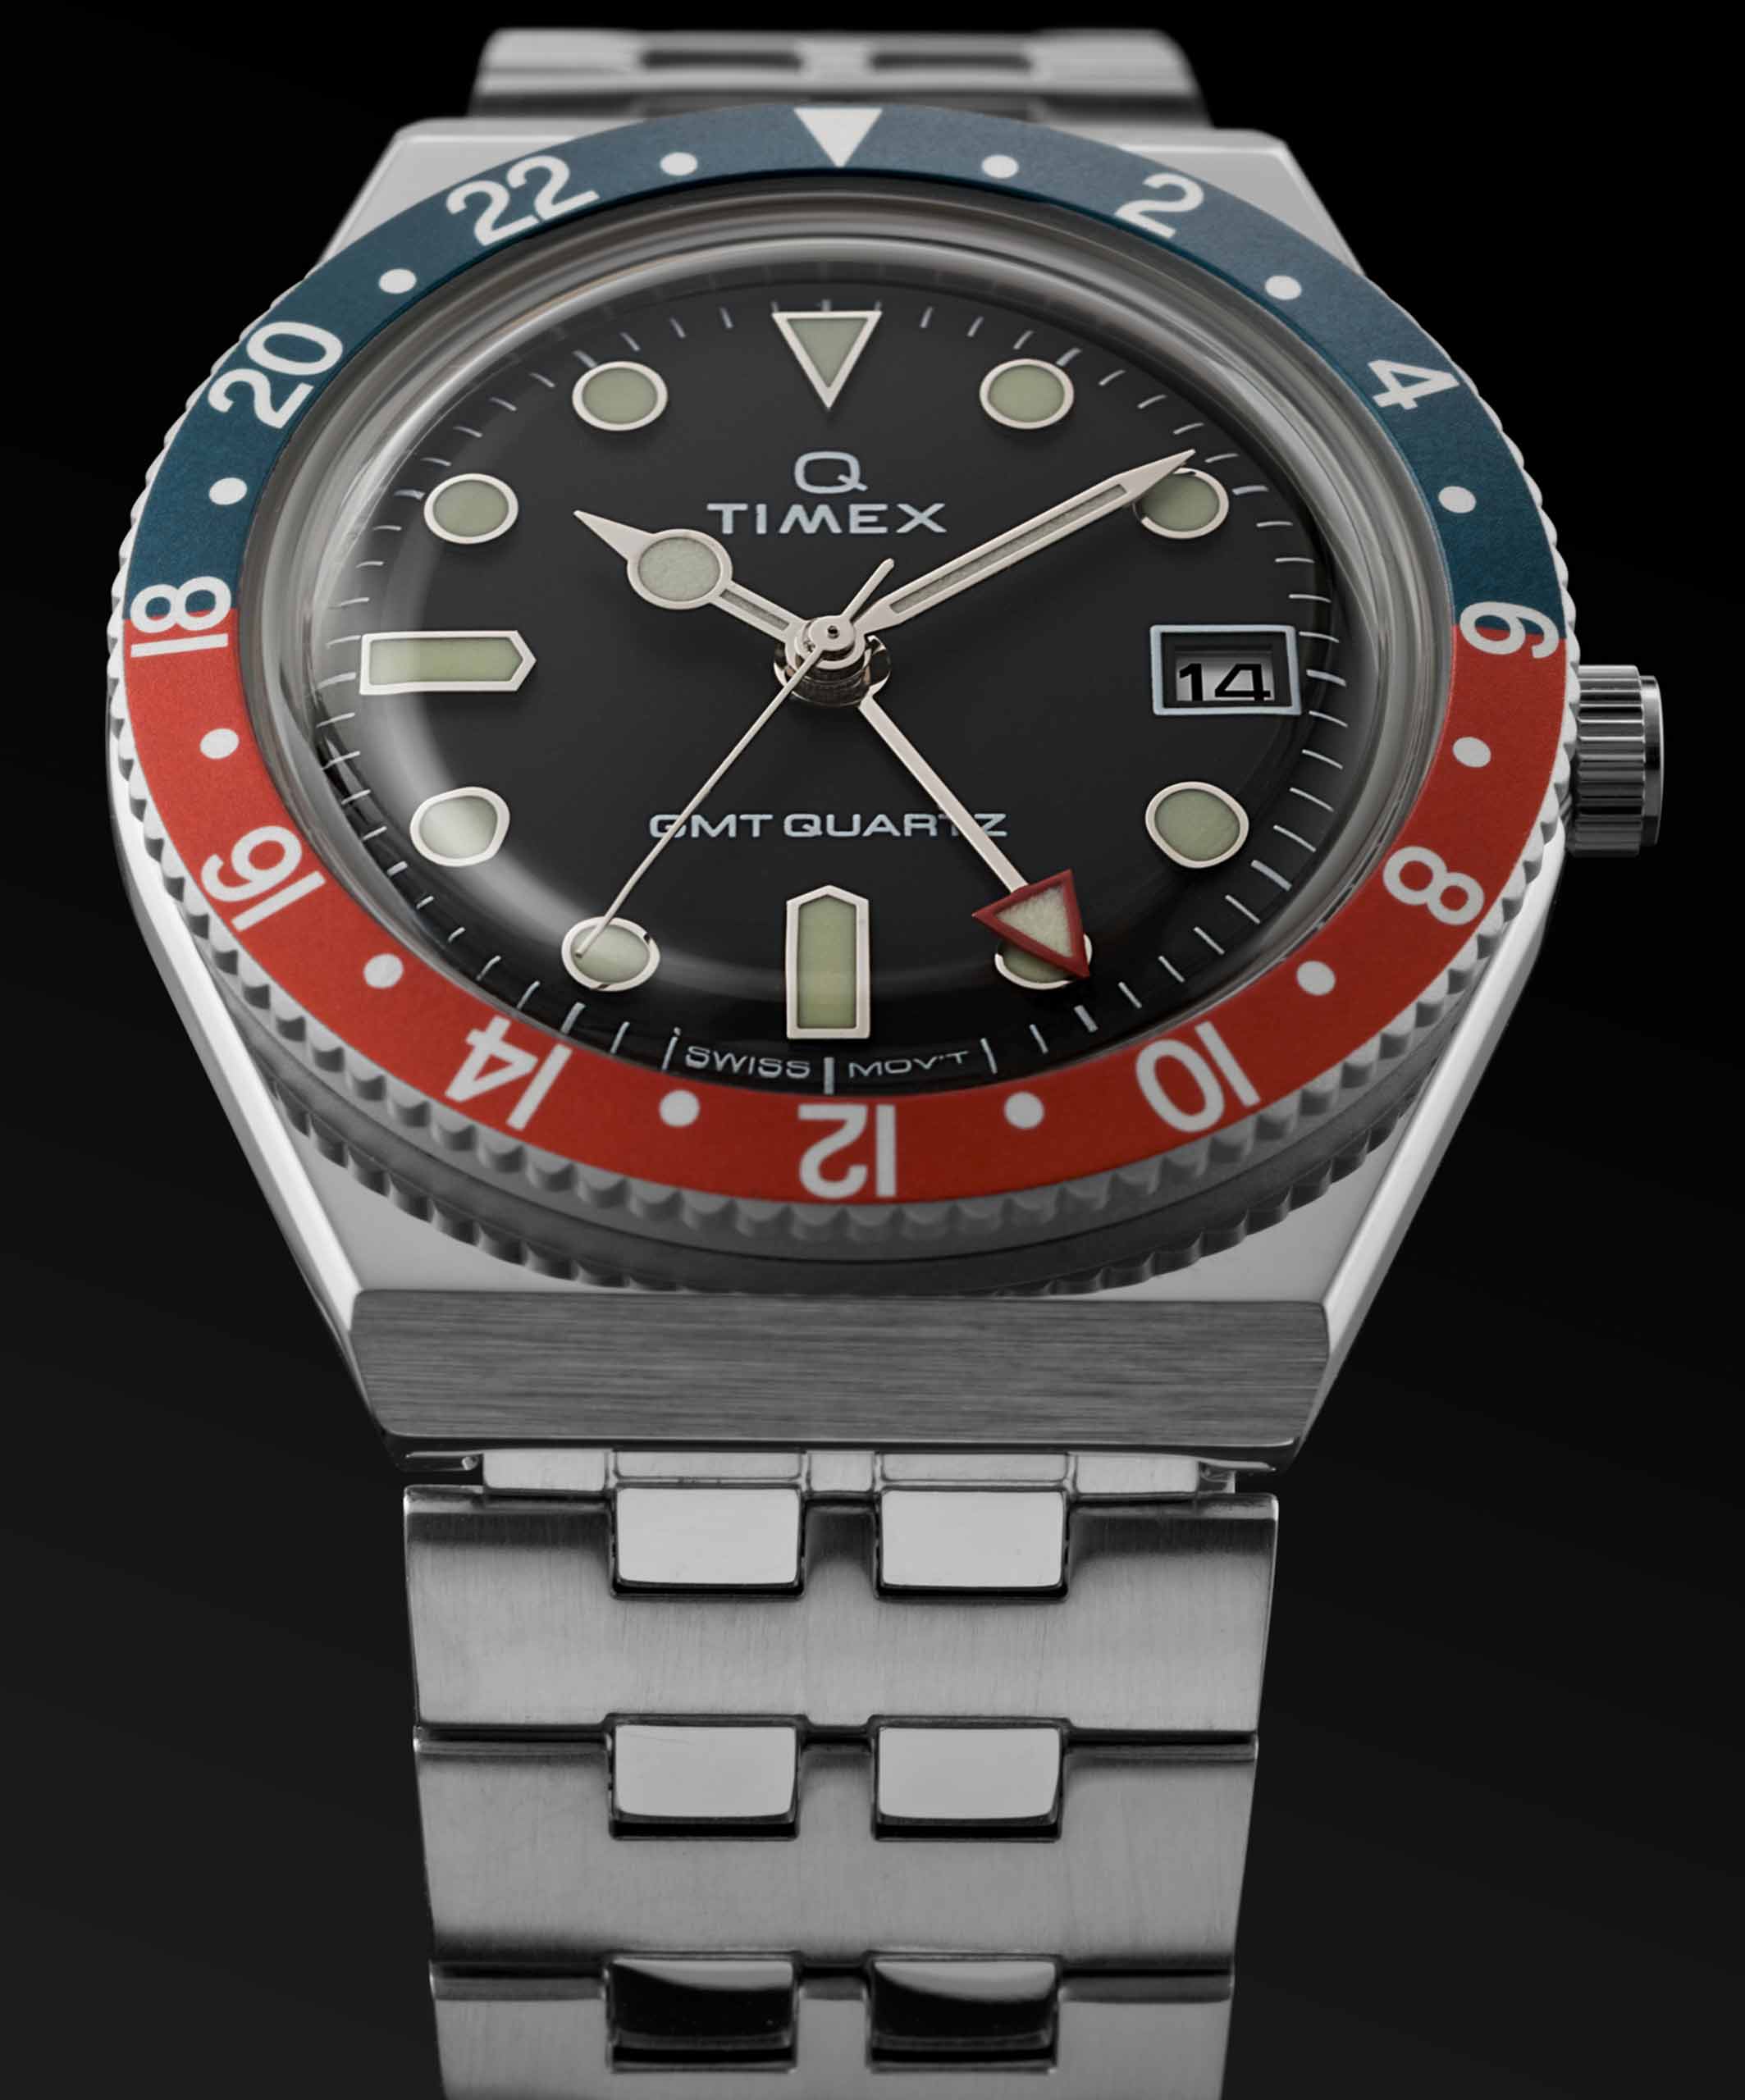 Timex Adds a GMT to the Q Lineup